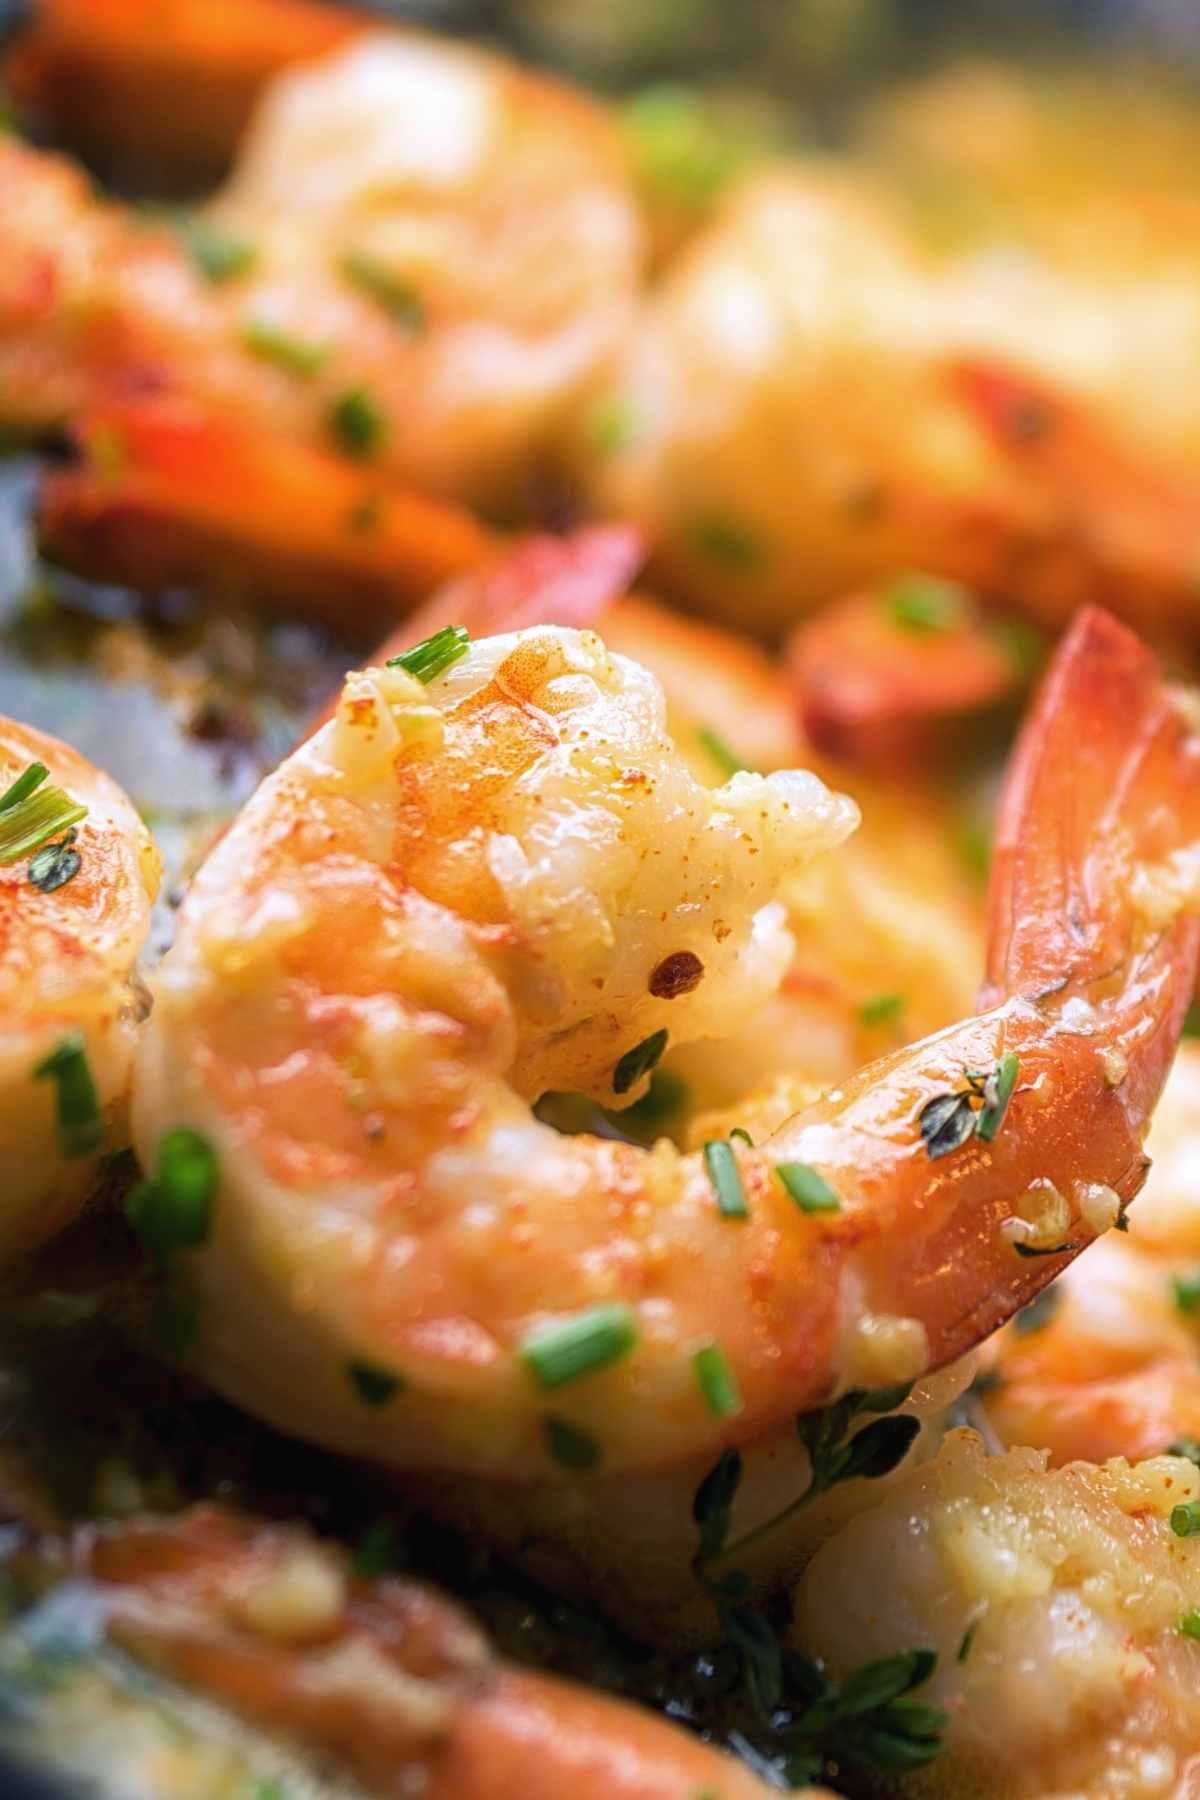 This Tiger Shrimp is succulent with amazing garlic and butter flavors. Enjoy it as an appetizer or toss it with your favorite pasta and some steamed broccoli for a complete meal! We’ll share with you some tips on how to cook tiger shrimp so it’s tender, plump, and juicy.